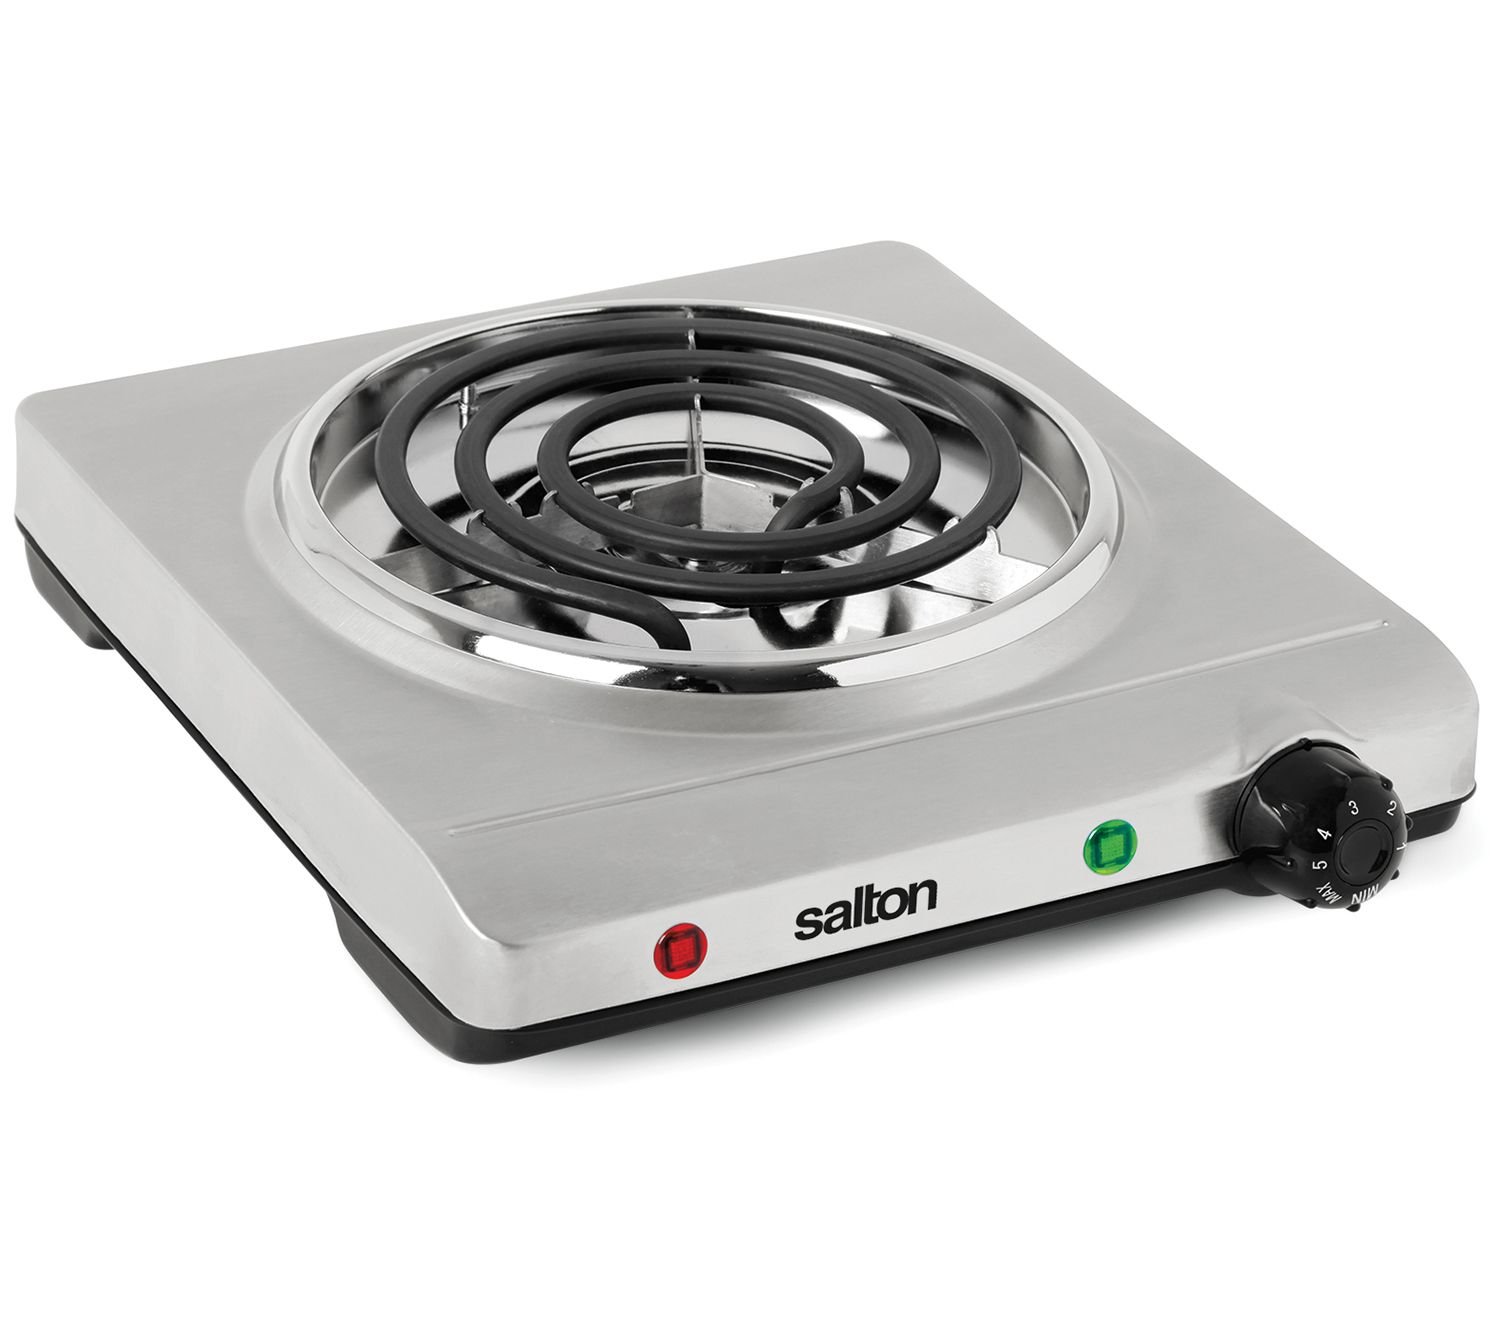 Salton Induction Cooktops Id1401us Vs Id1350 Id1293 Review Review